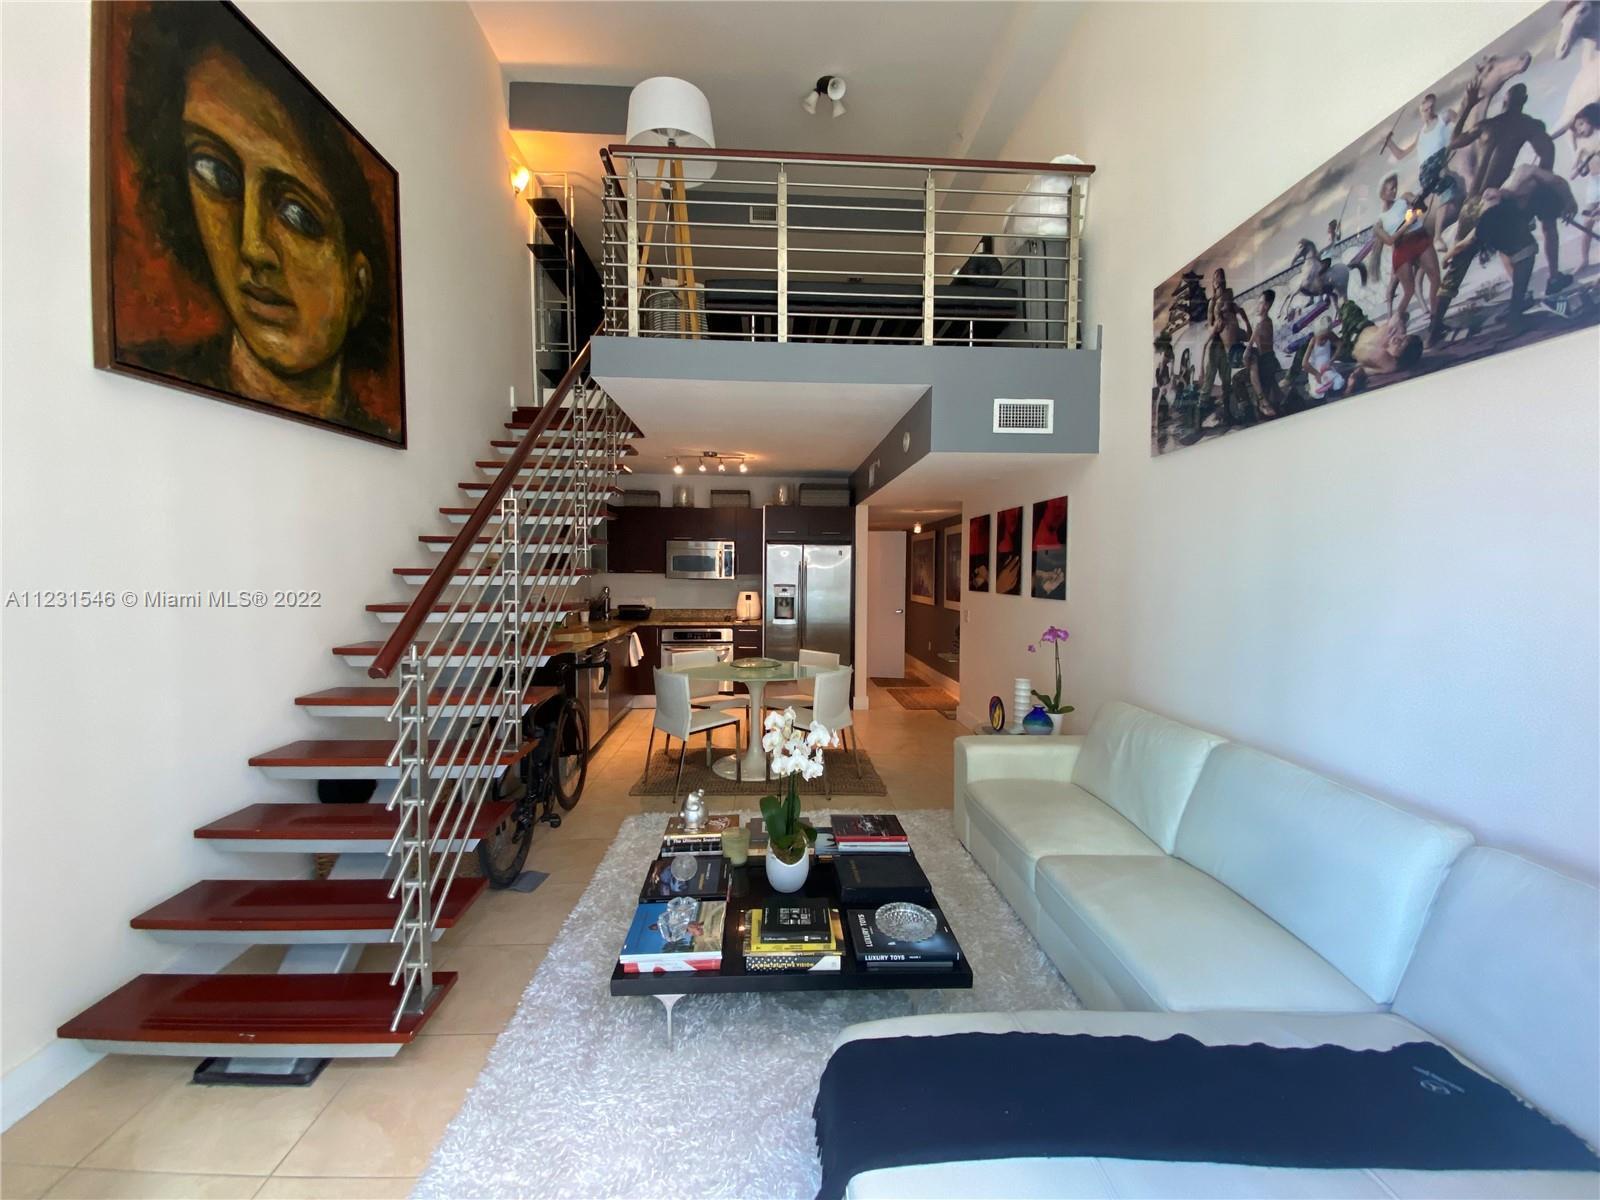 INVESTMENT OPPORTUNITY! Beautiful two story Loft in Luxury Building with amazing city views. Great L